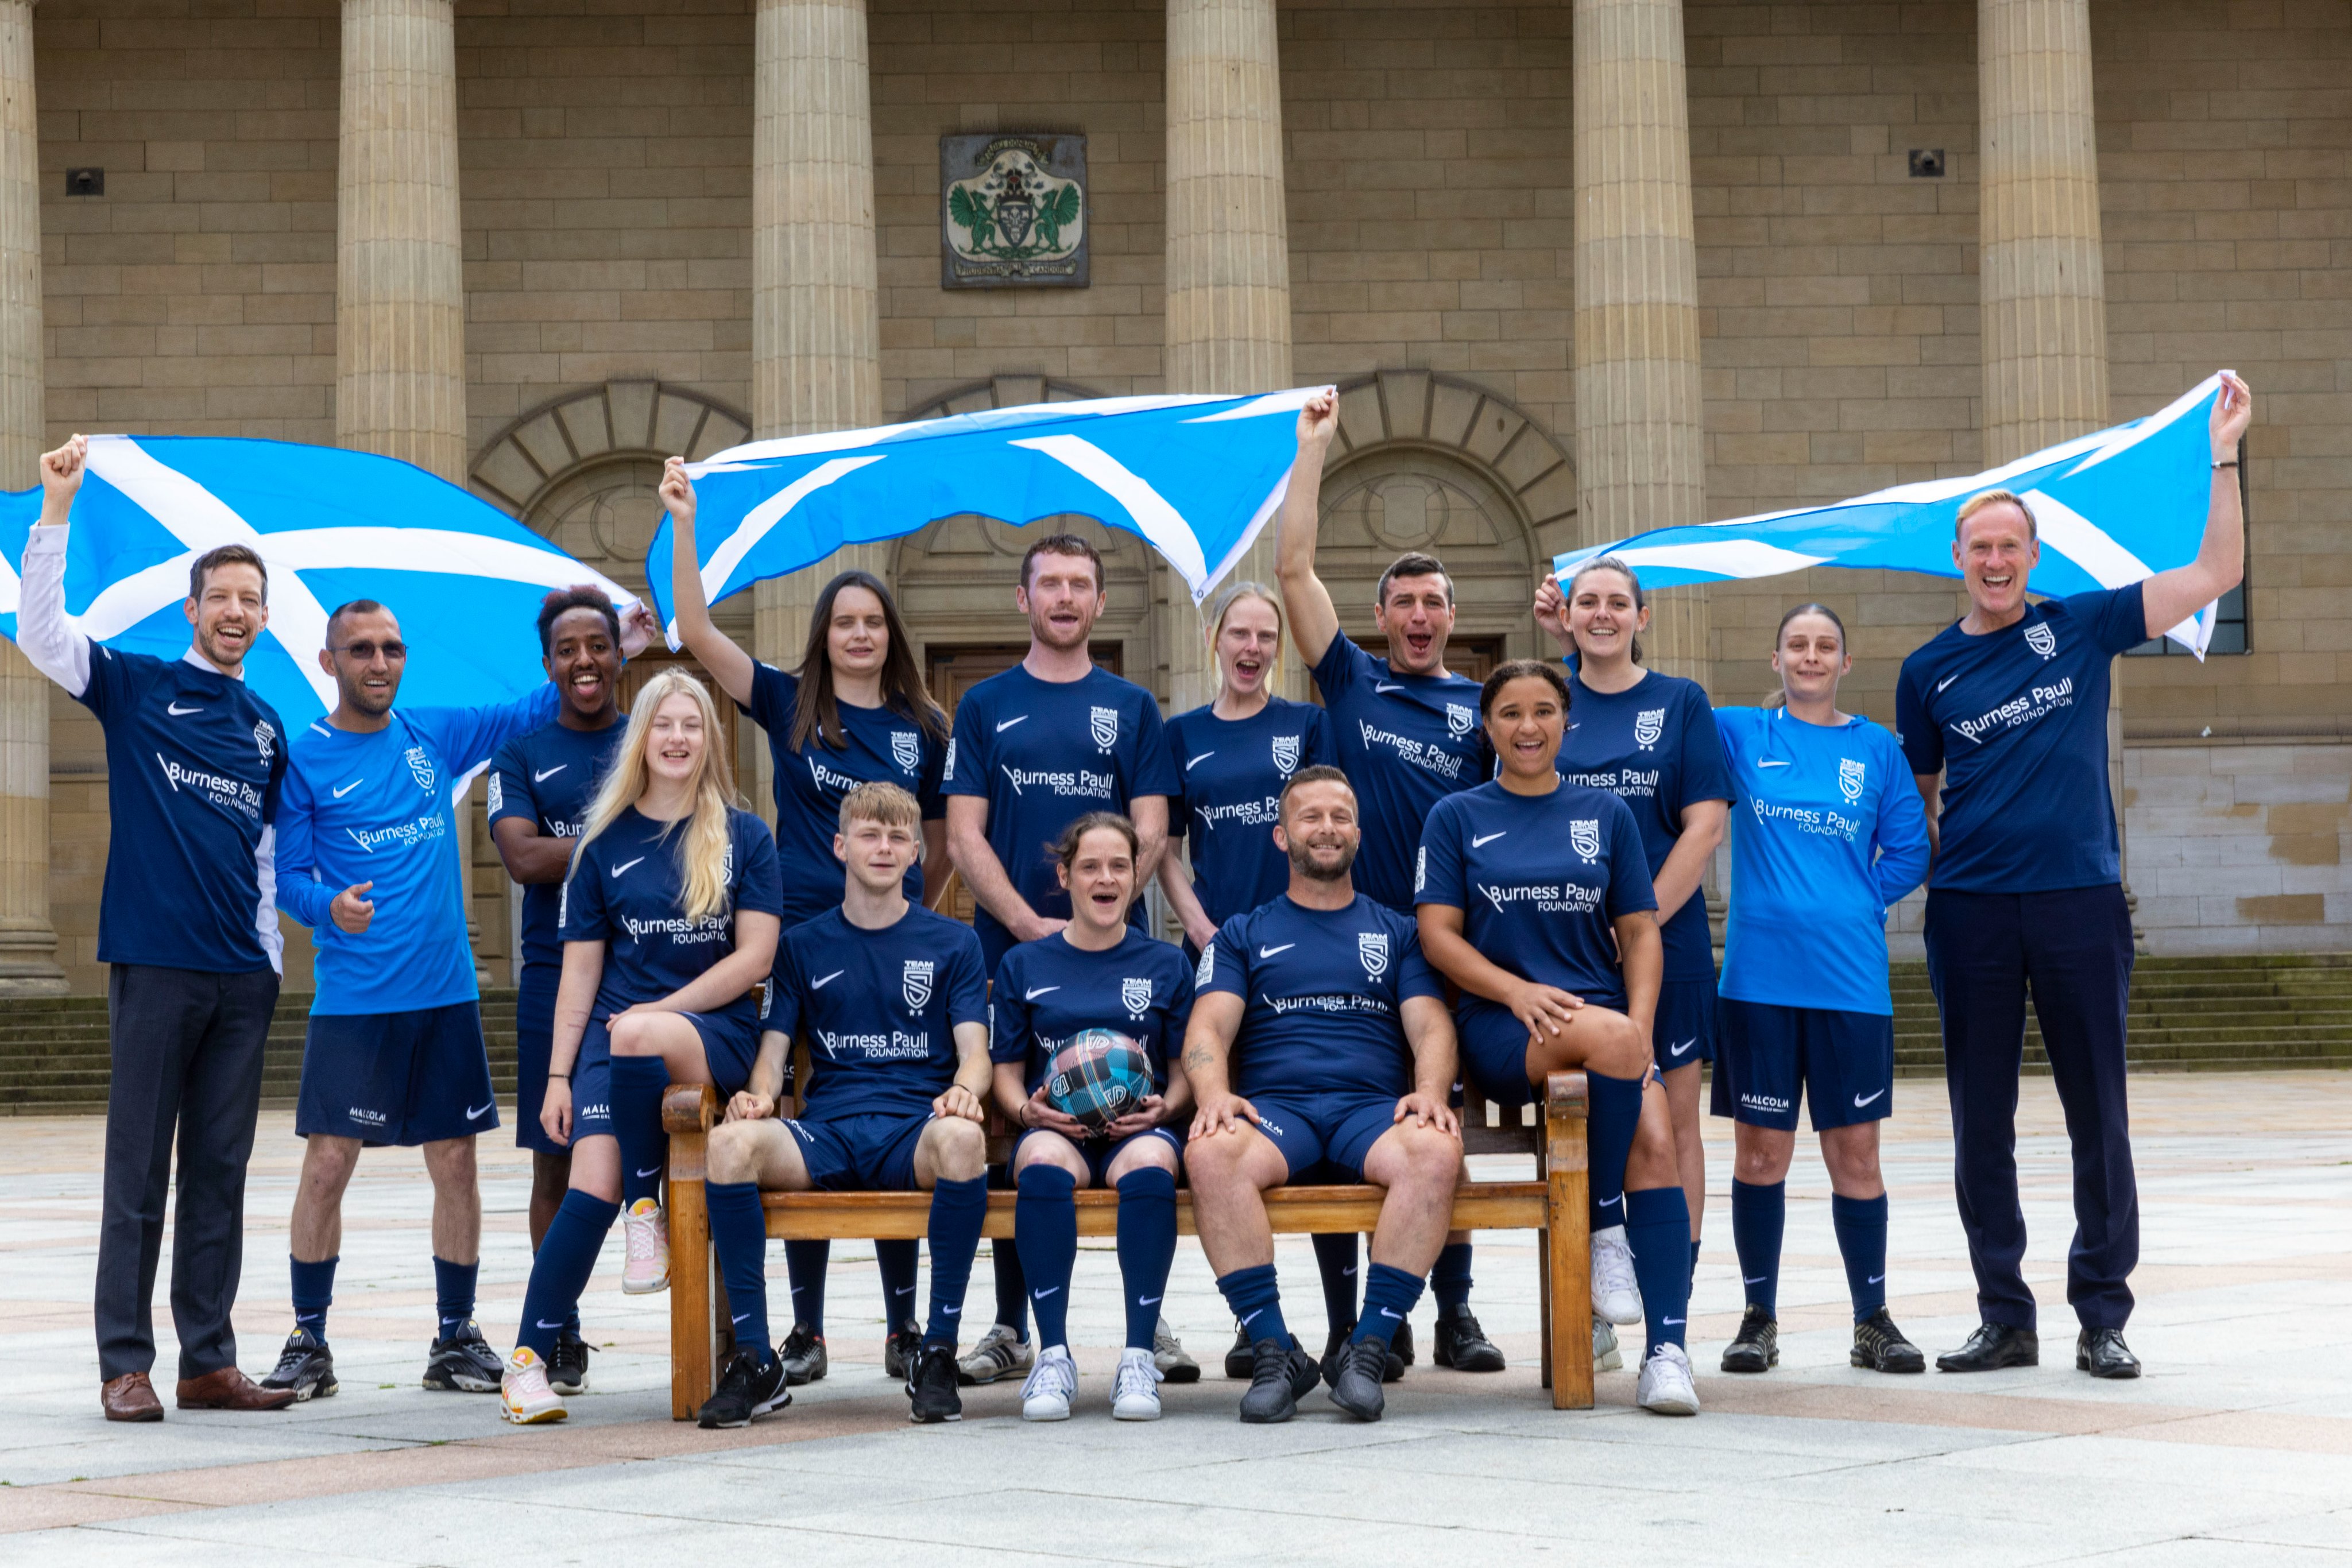 Dundee prepares to host Street Soccer event